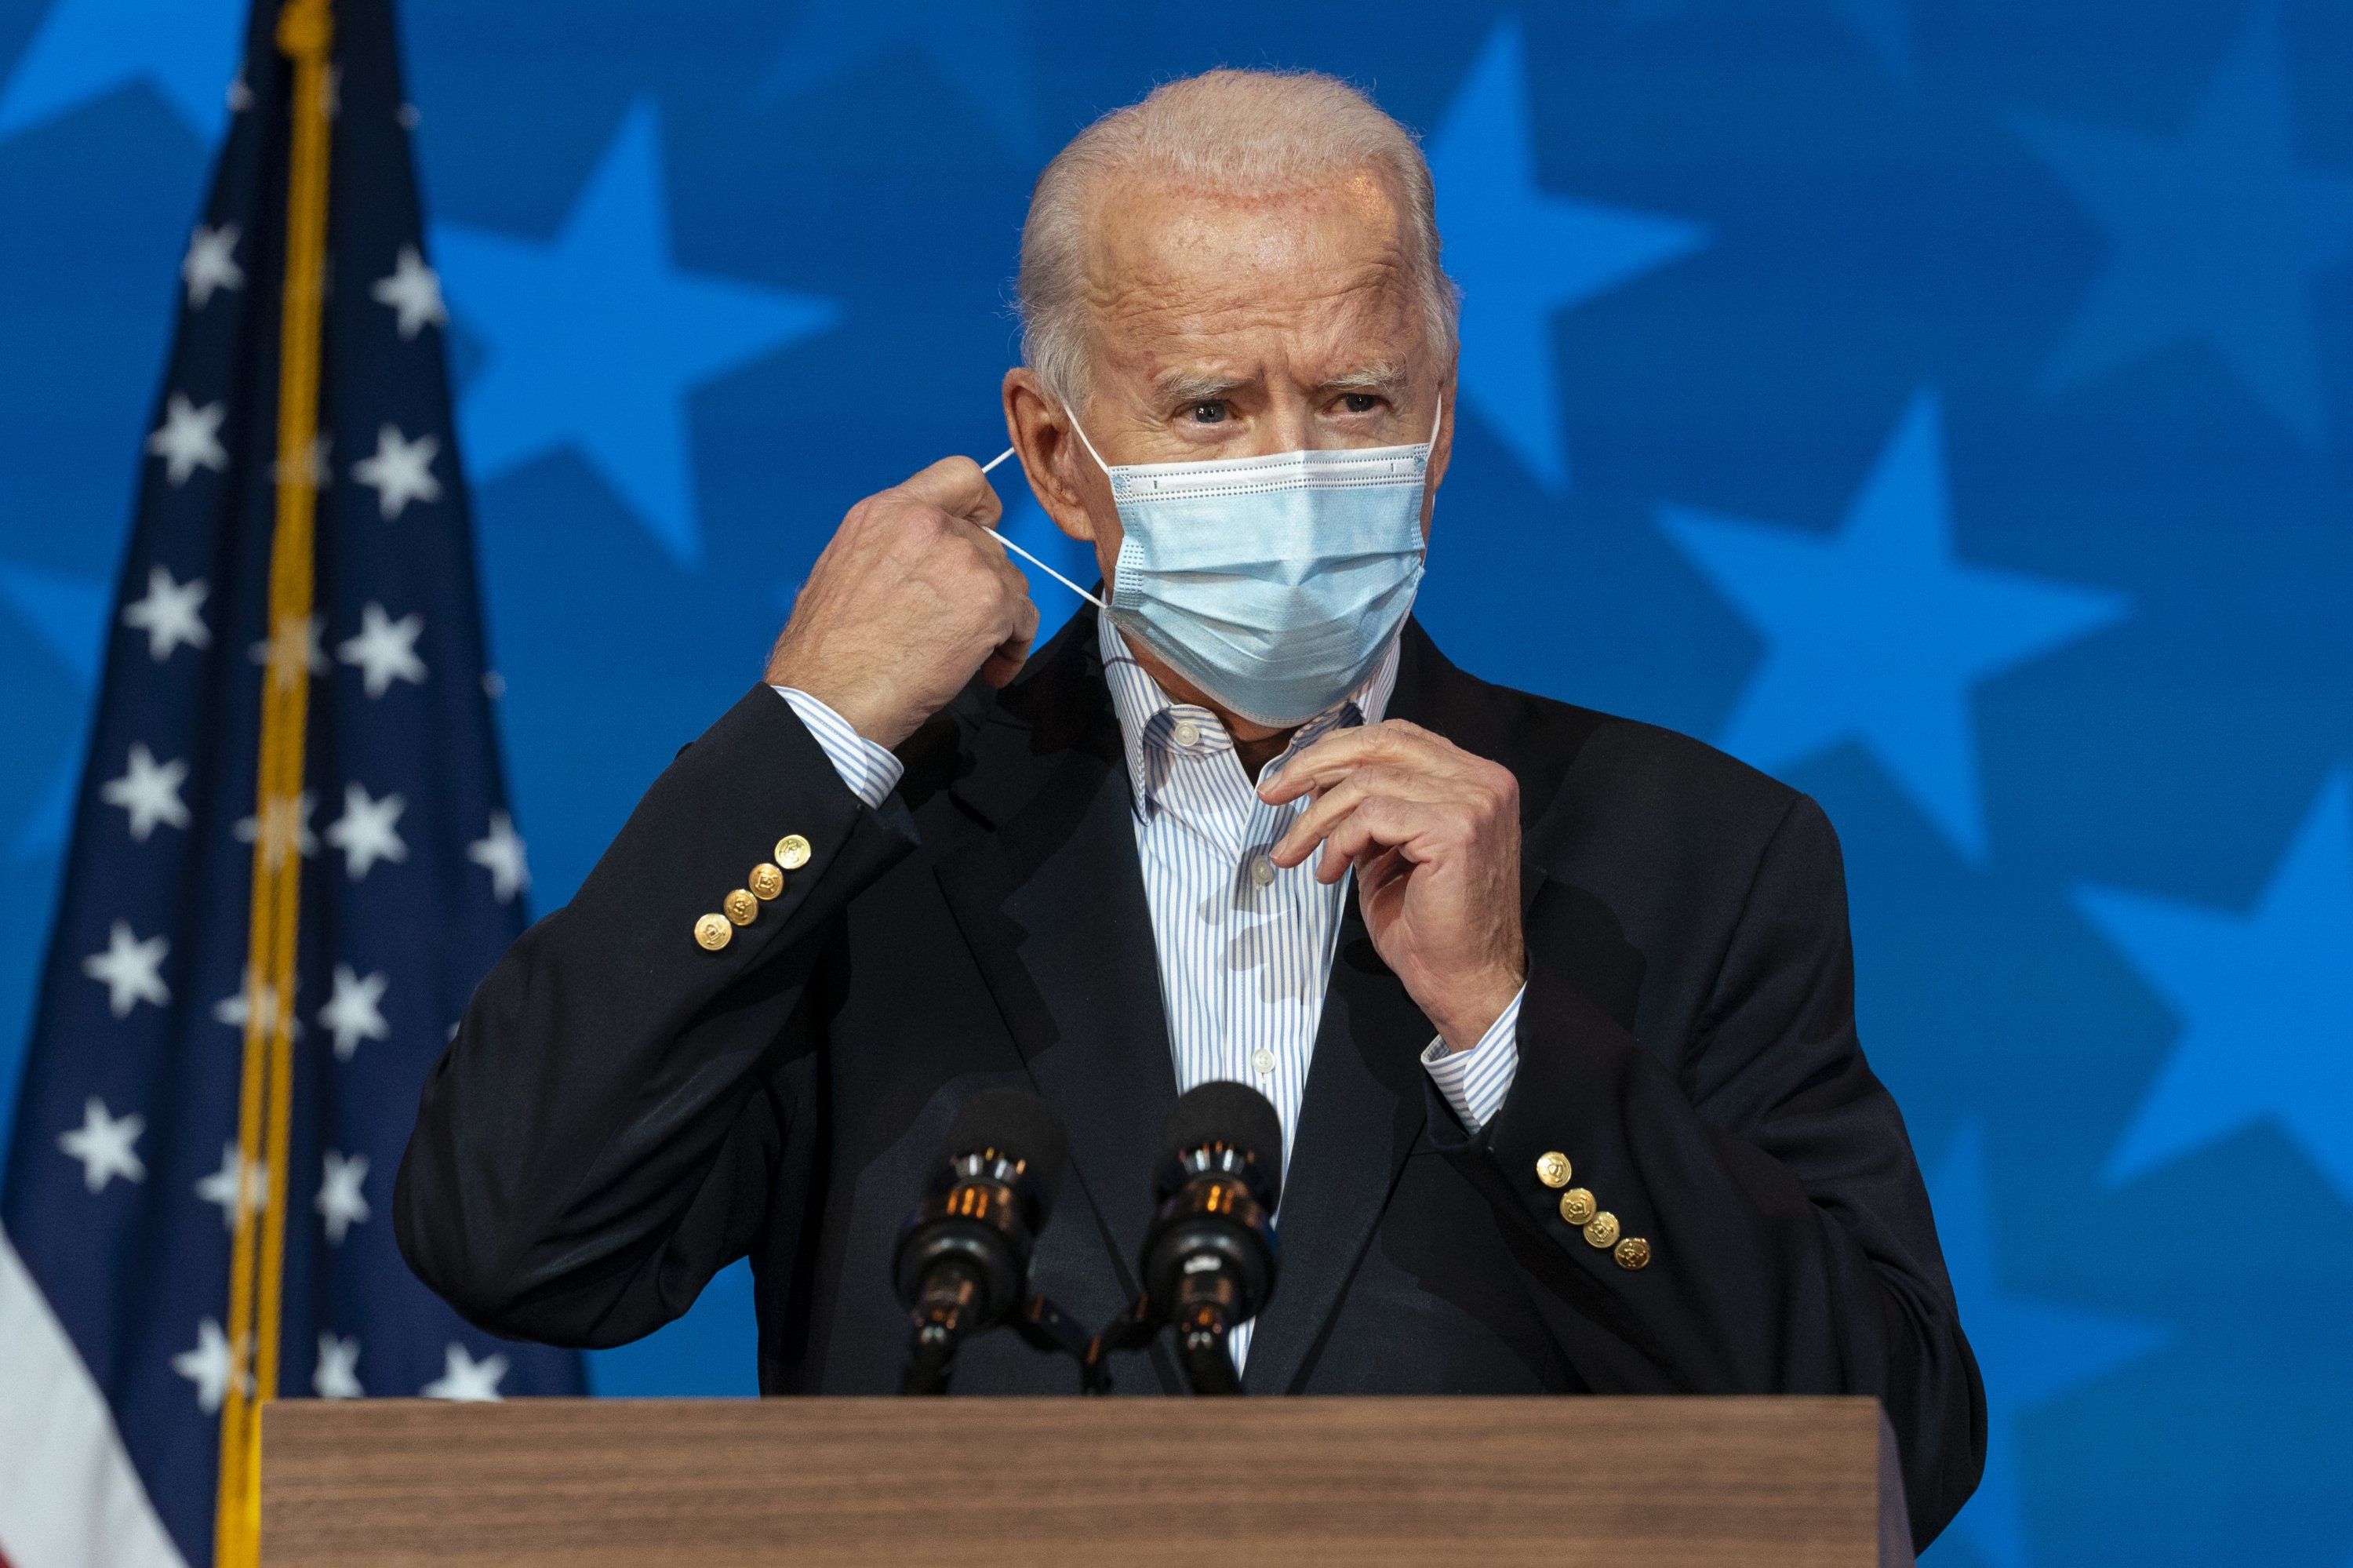 Joe Biden removes his face mask to speak at The Queen theater, in Wilmington, North Carolina, in a campaign event. Image by Stratos Brilakis / Shutterstock. United States, 2020.